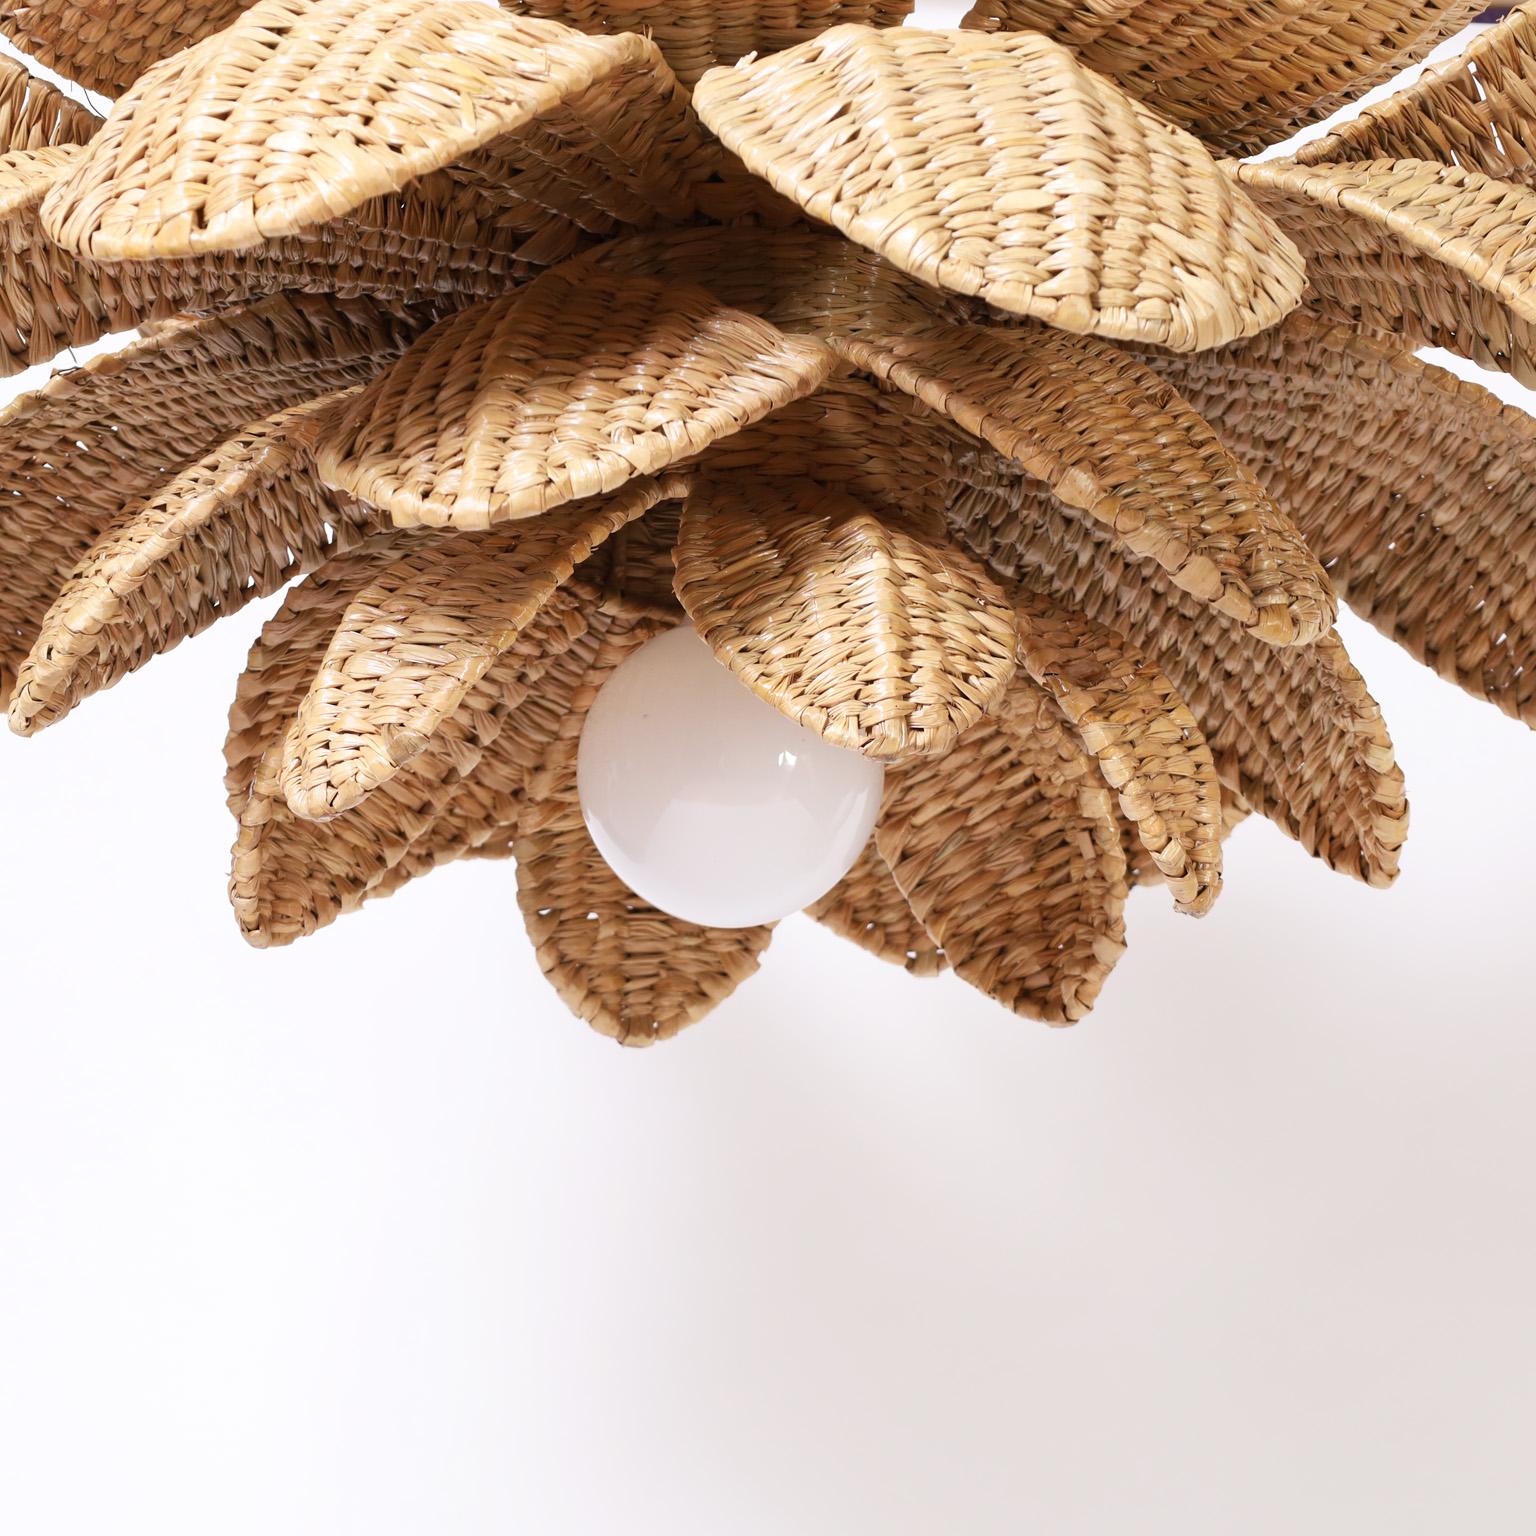 Hand-Woven Nassau Wicker Lotus Light Fixture or Pendant from the Flores Collection For Sale